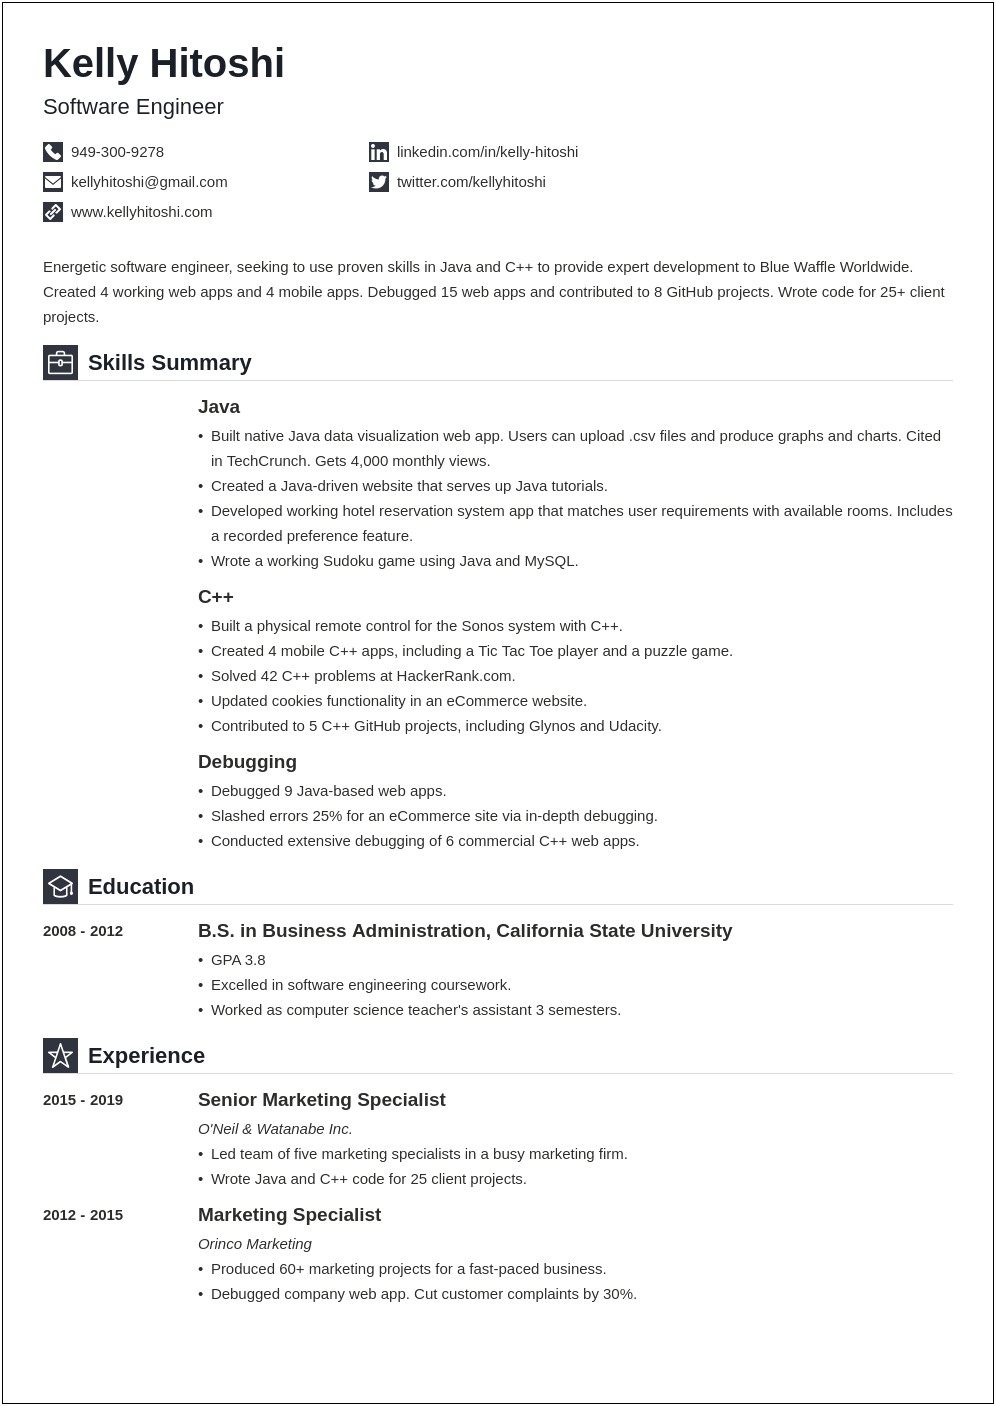 Summary Resume Examples For Changing Jobs 2019